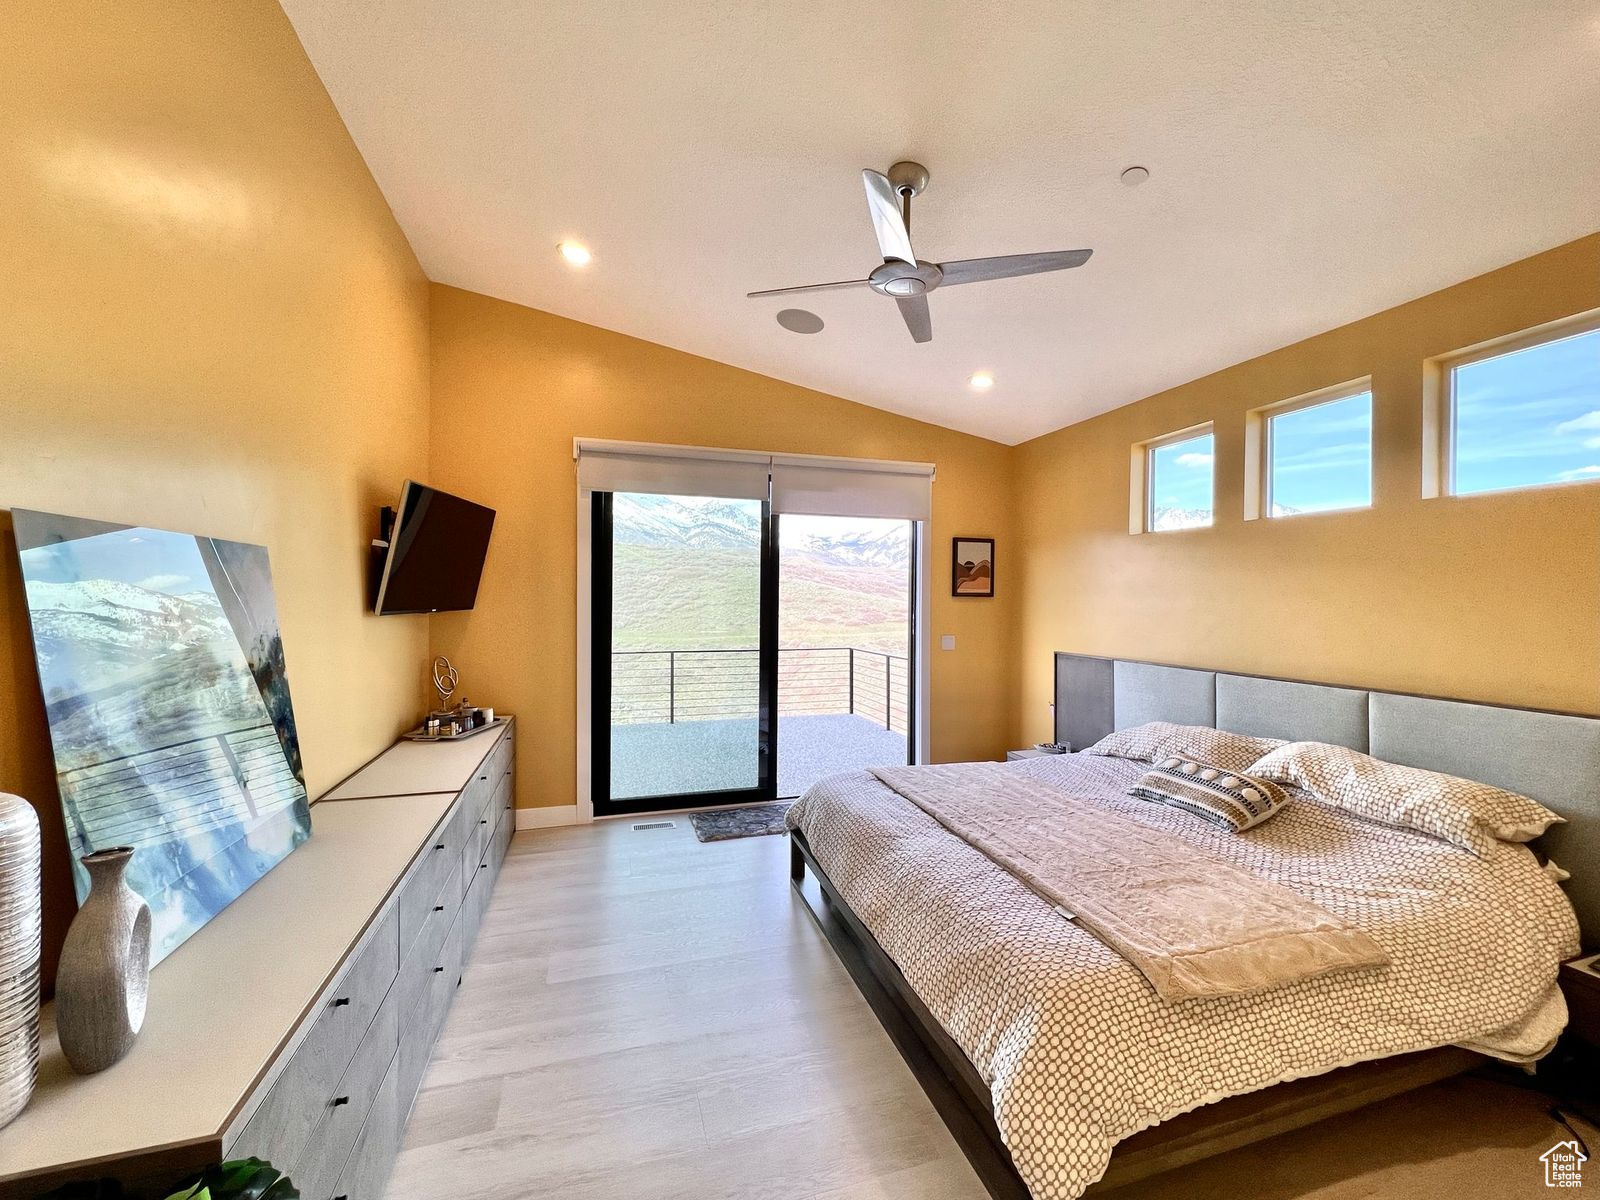 Bedroom featuring ceiling fan, vaulted ceiling, light hardwood / wood-style floors, and access to outside